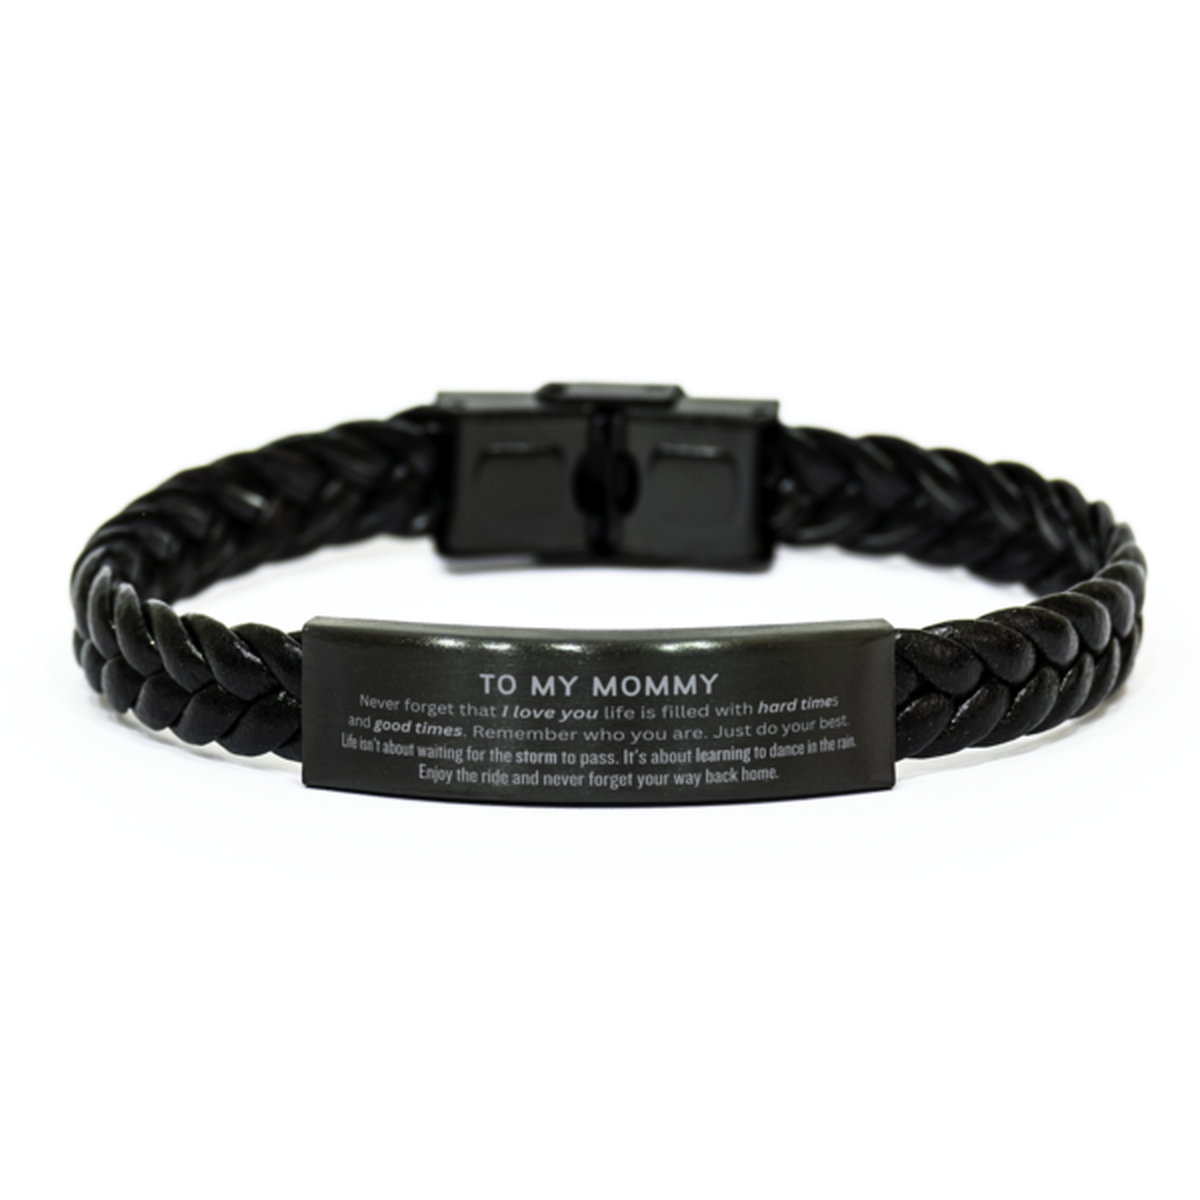 Christmas Mommy Braided Leather Bracelet Gifts, To My Mommy Birthday Thank You Gifts For Mommy, Graduation Unique Gifts For Mommy To My Mommy Never forget that I love you life is filled with hard times and good times. Remember who you are. Just do your be